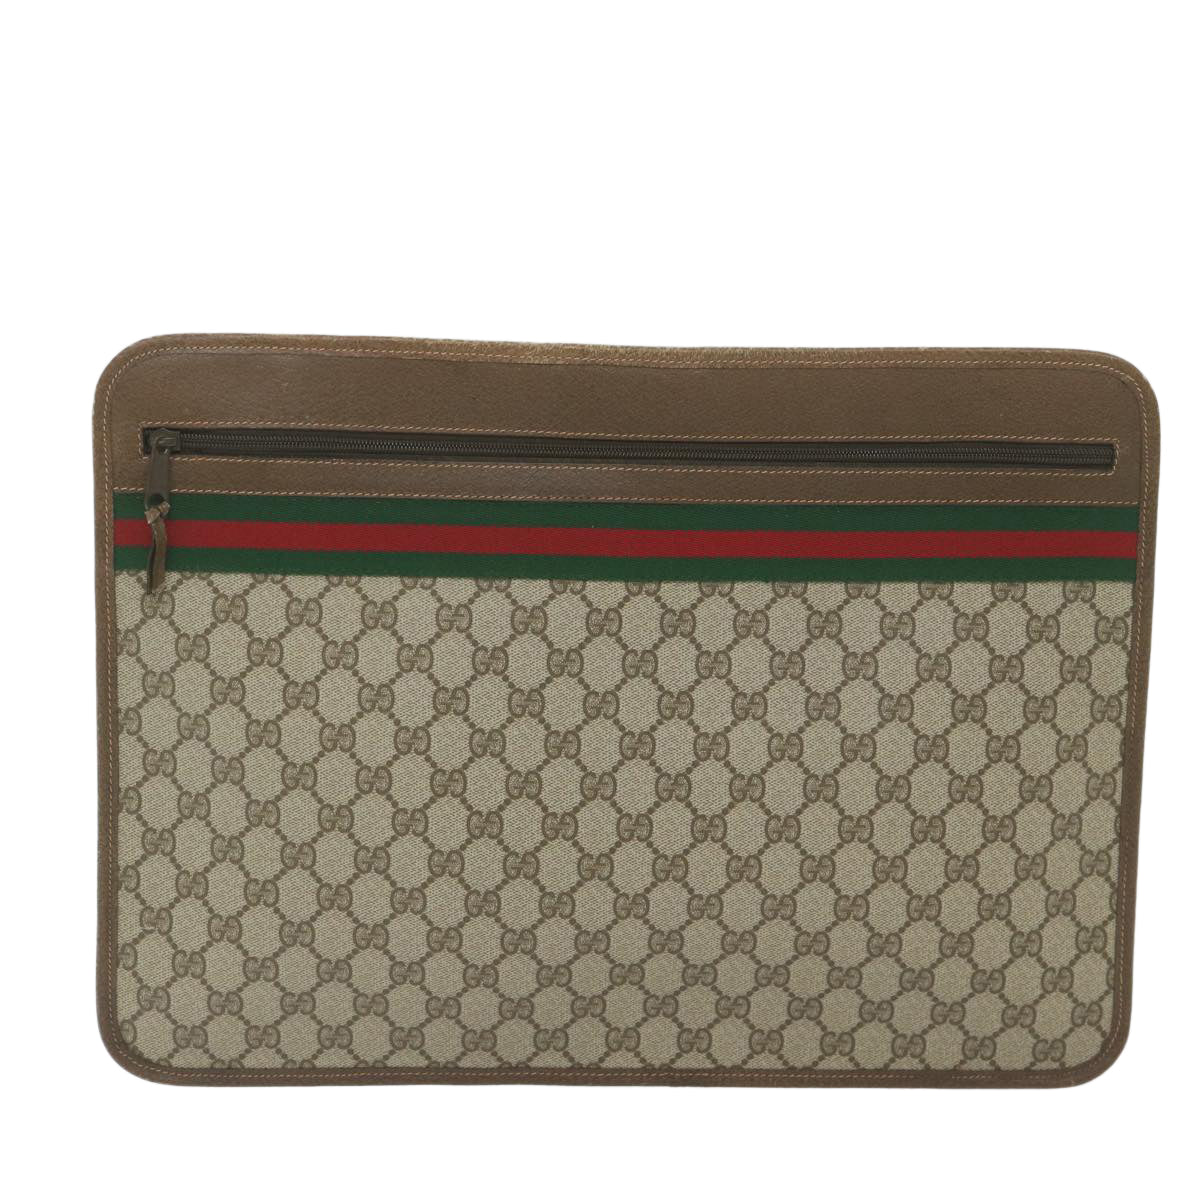 GUCCI GG Supreme Web Sherry Line Briefcase Beige Red Green 89 02 060 Auth tb936 - 0